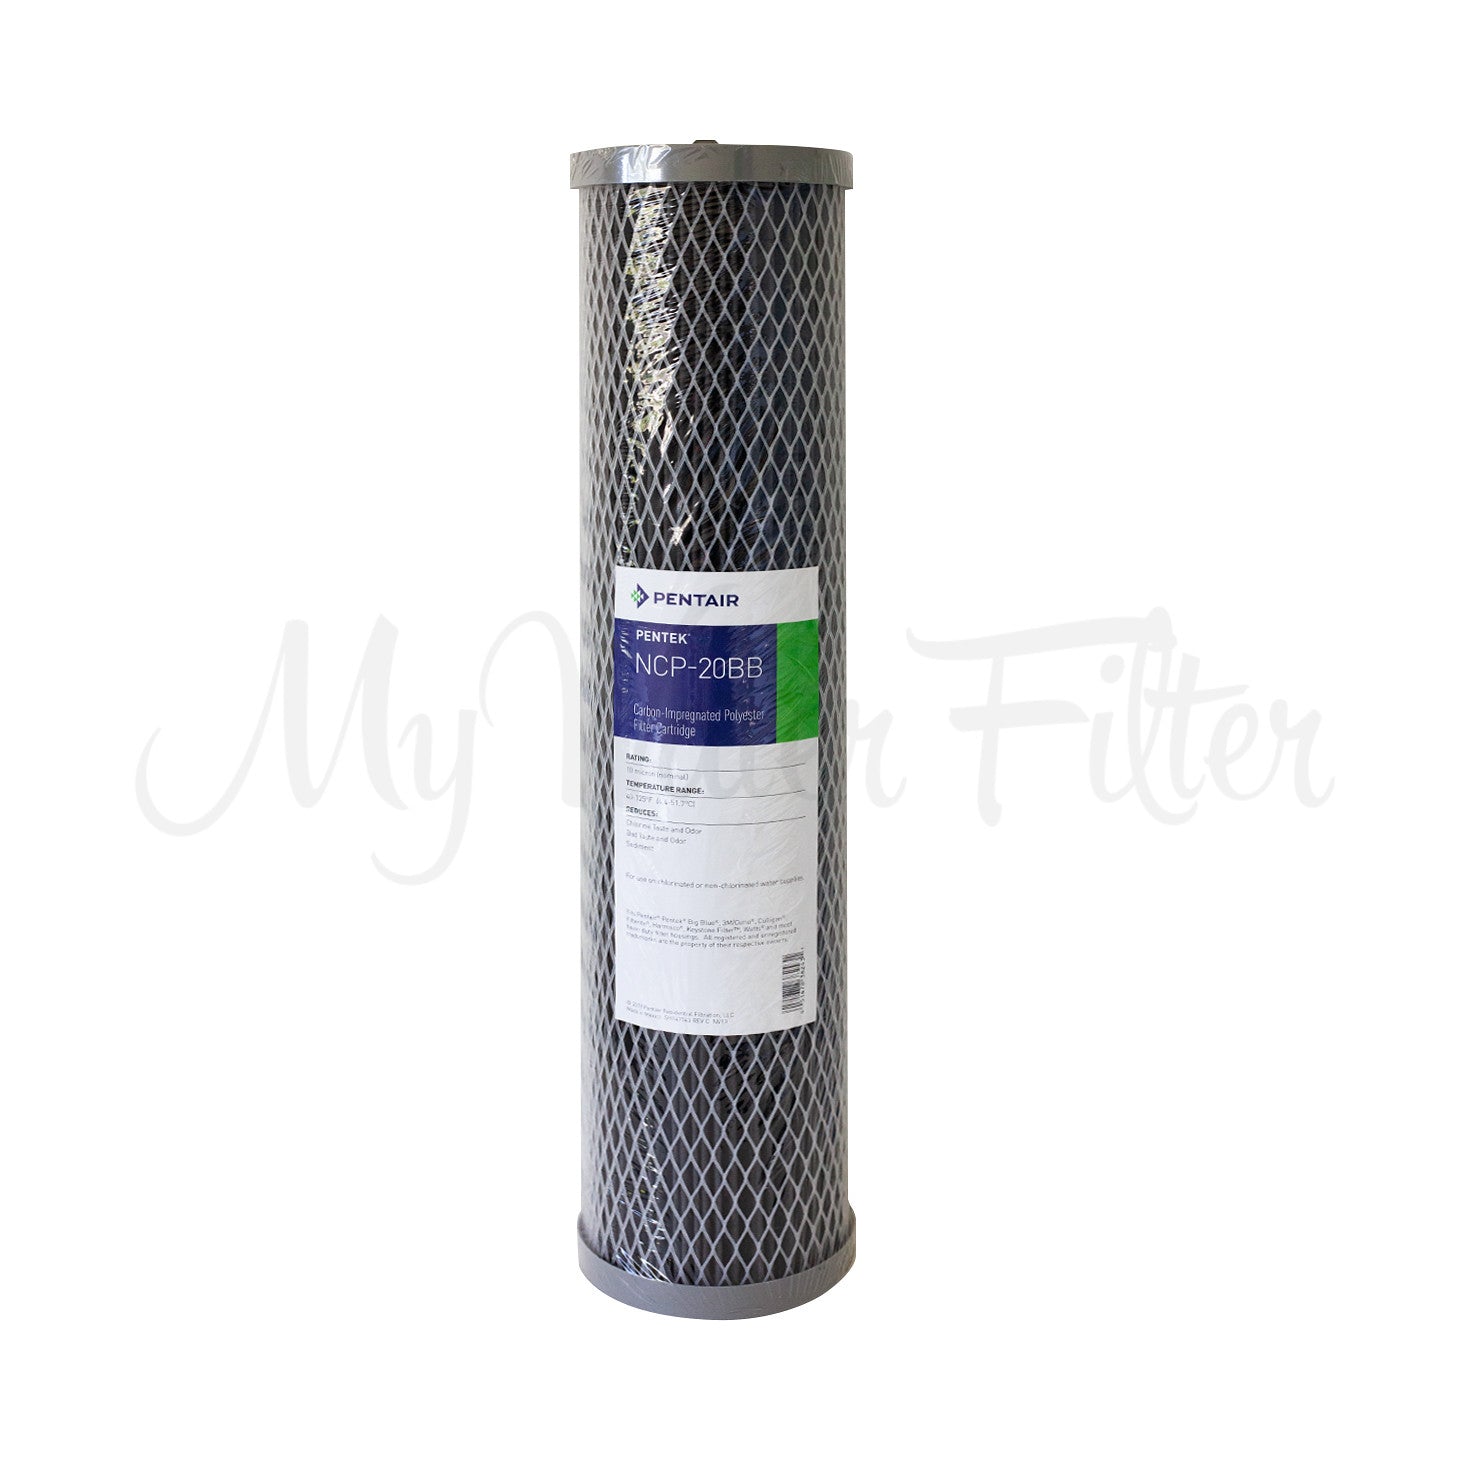 10 Micron Carbon Impregnated Pleated Sediment Whole House Water Filter Replacement Cartridge 20 x 4.5 with watermark